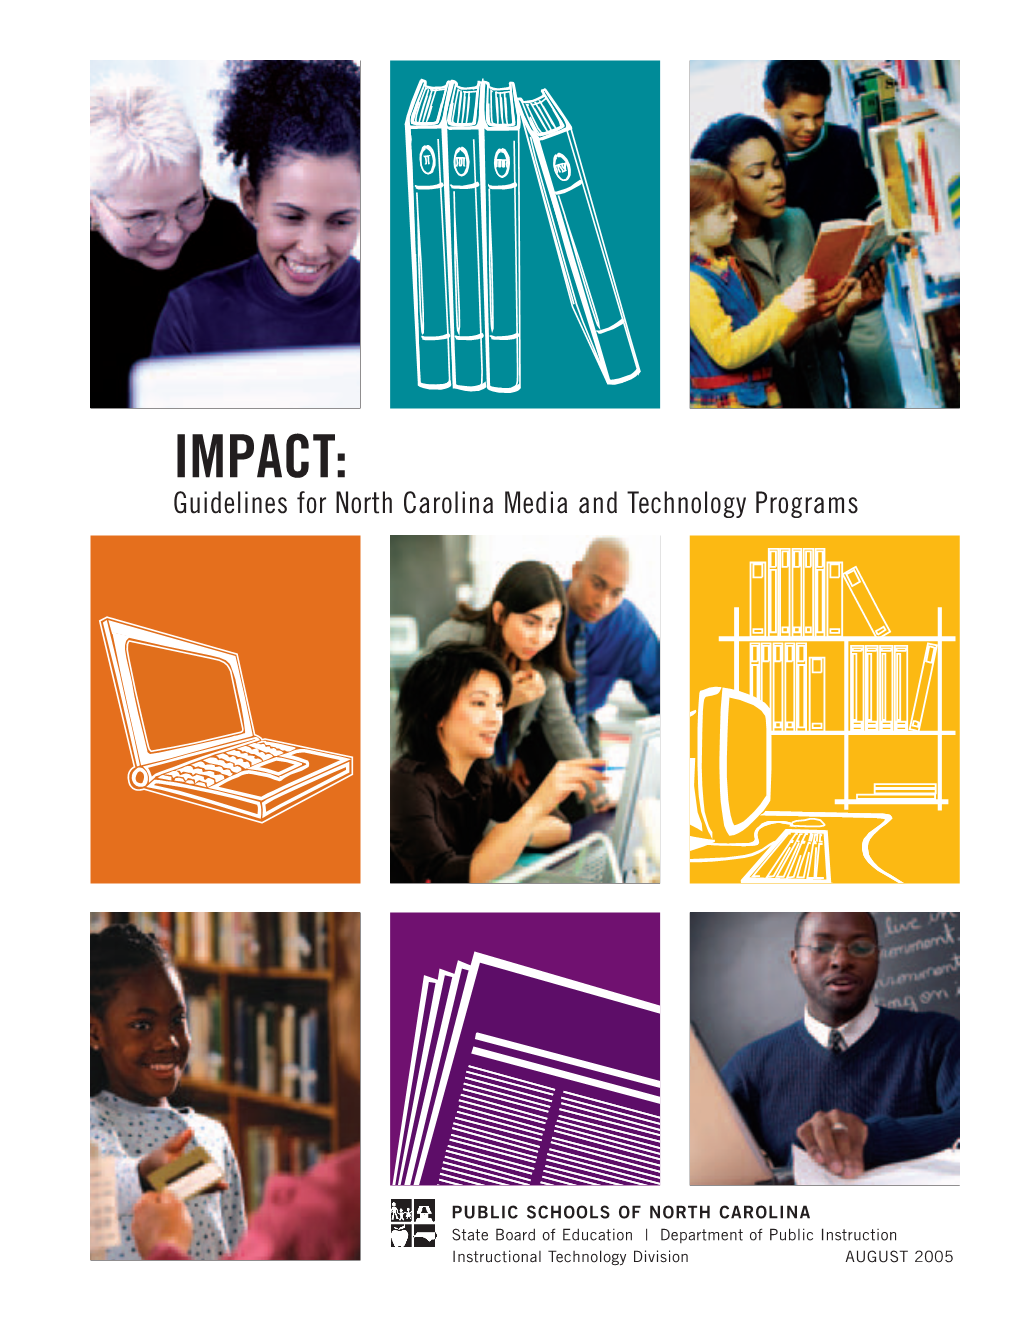 IMPACT: Guidelines for North Carolina Media and Technology Programs